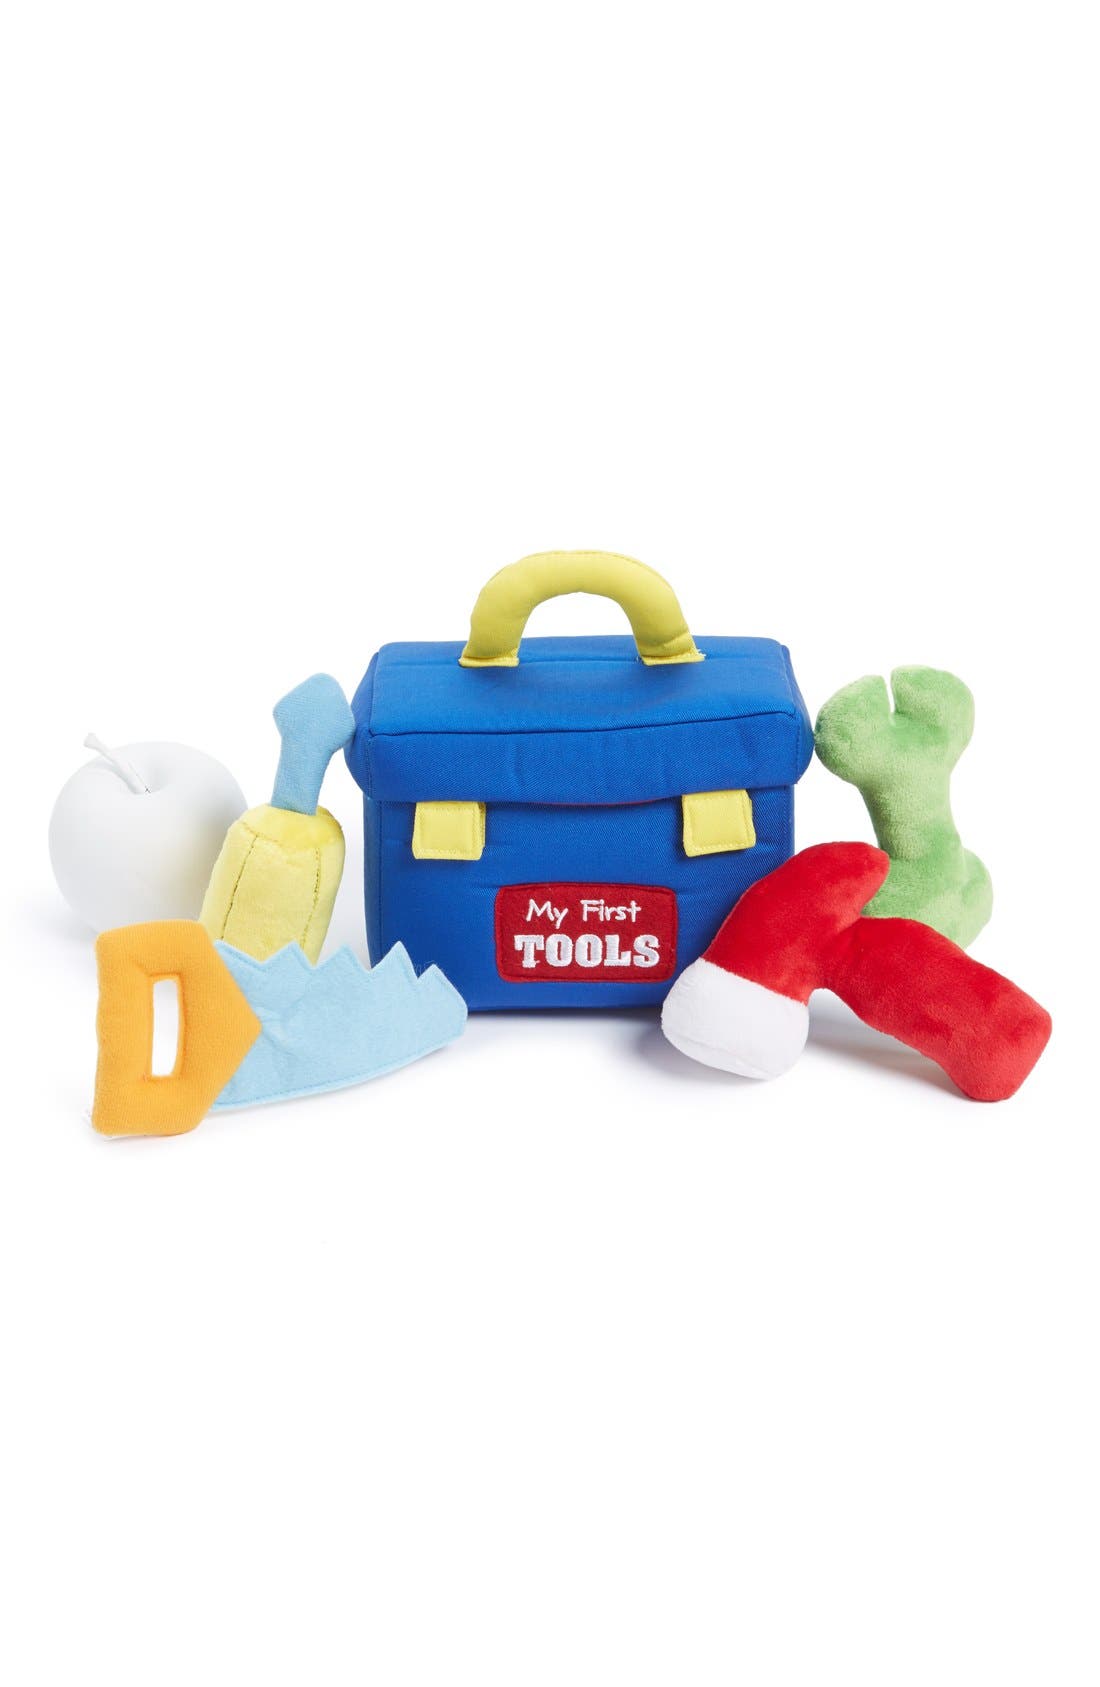 UPC 028399071593 product image for Infant Gund 'My First Toolbox' Plush Play Set | upcitemdb.com